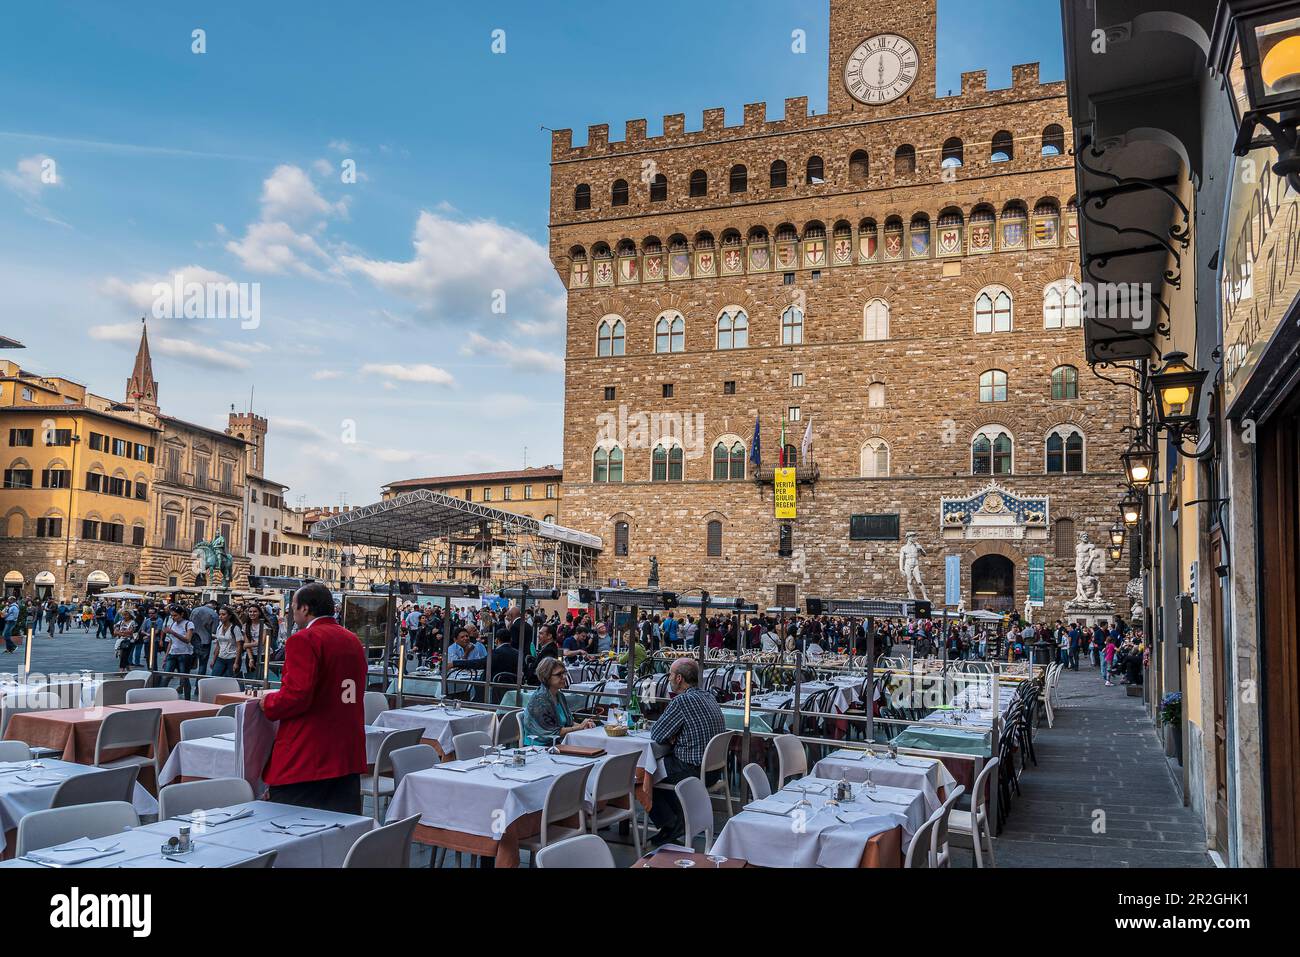 People at a restaurant in front of the Palazzo Vecchio town hall, Piazza della Signoria, Florence, Tuscany, Italy, Europe Stock Photo